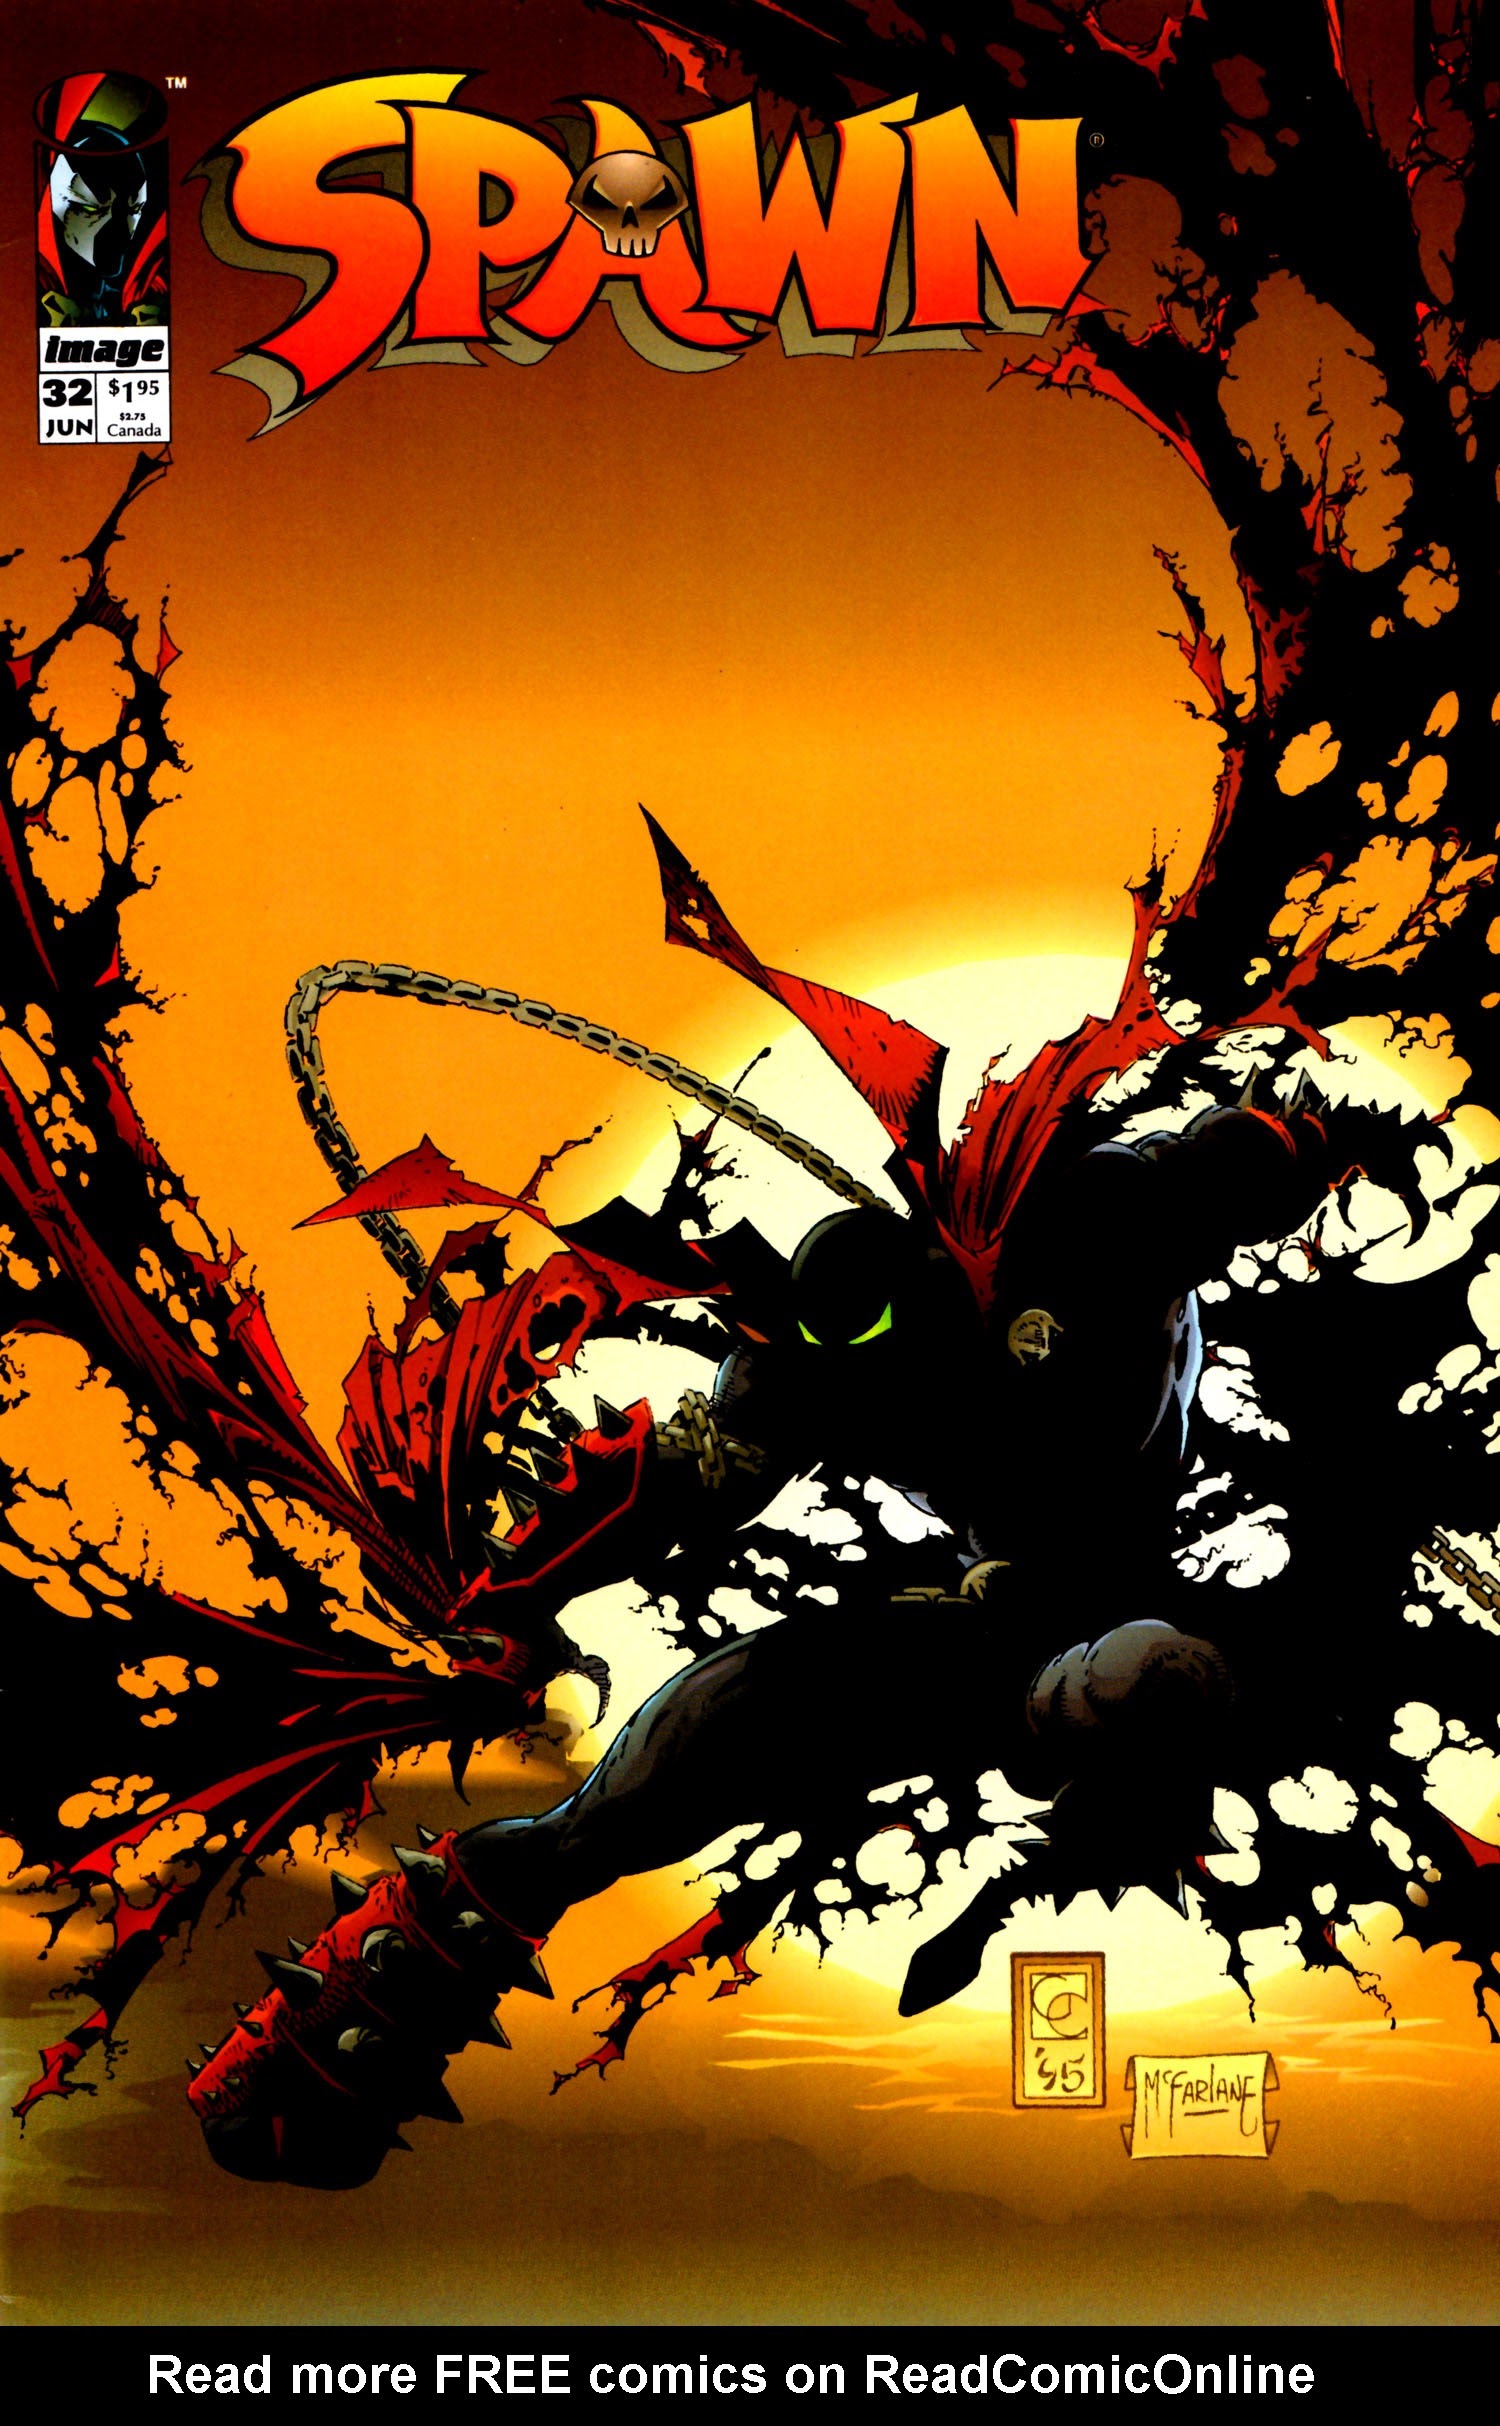 Read online Spawn comic -  Issue #32 - 1